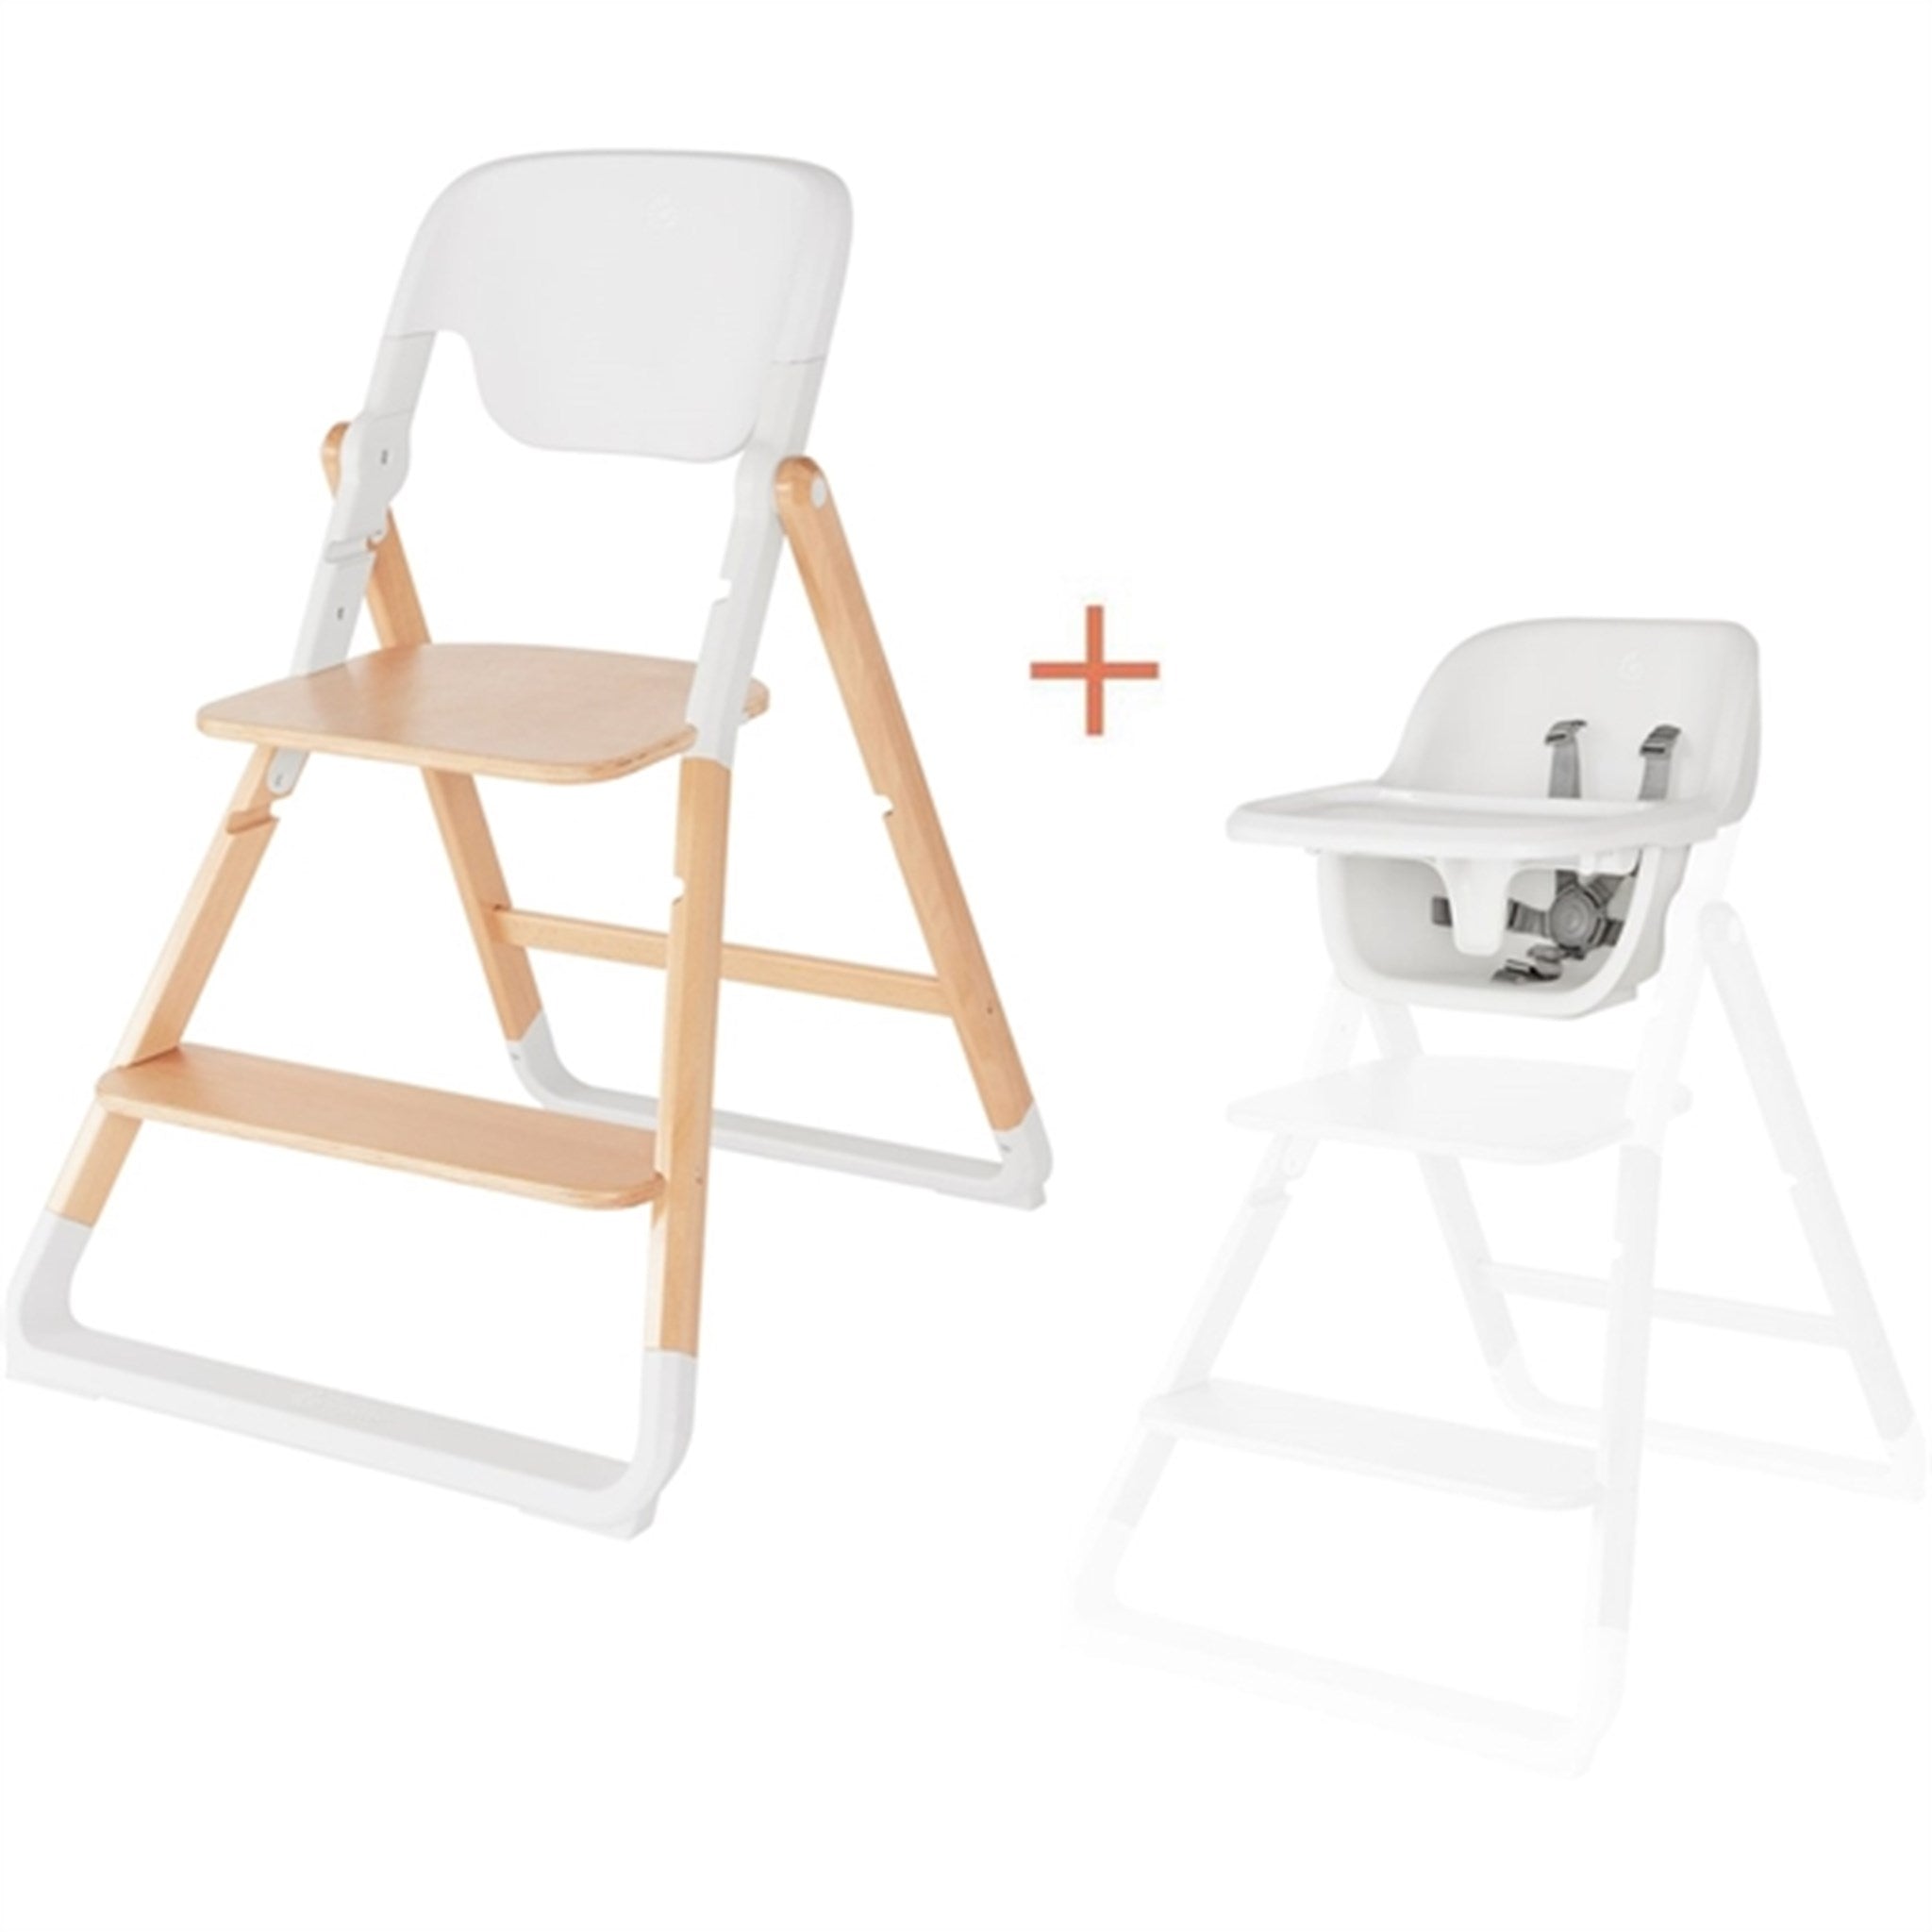 Ergobaby Evolve 2-in-1 High Chair + Chair Natural Wood White